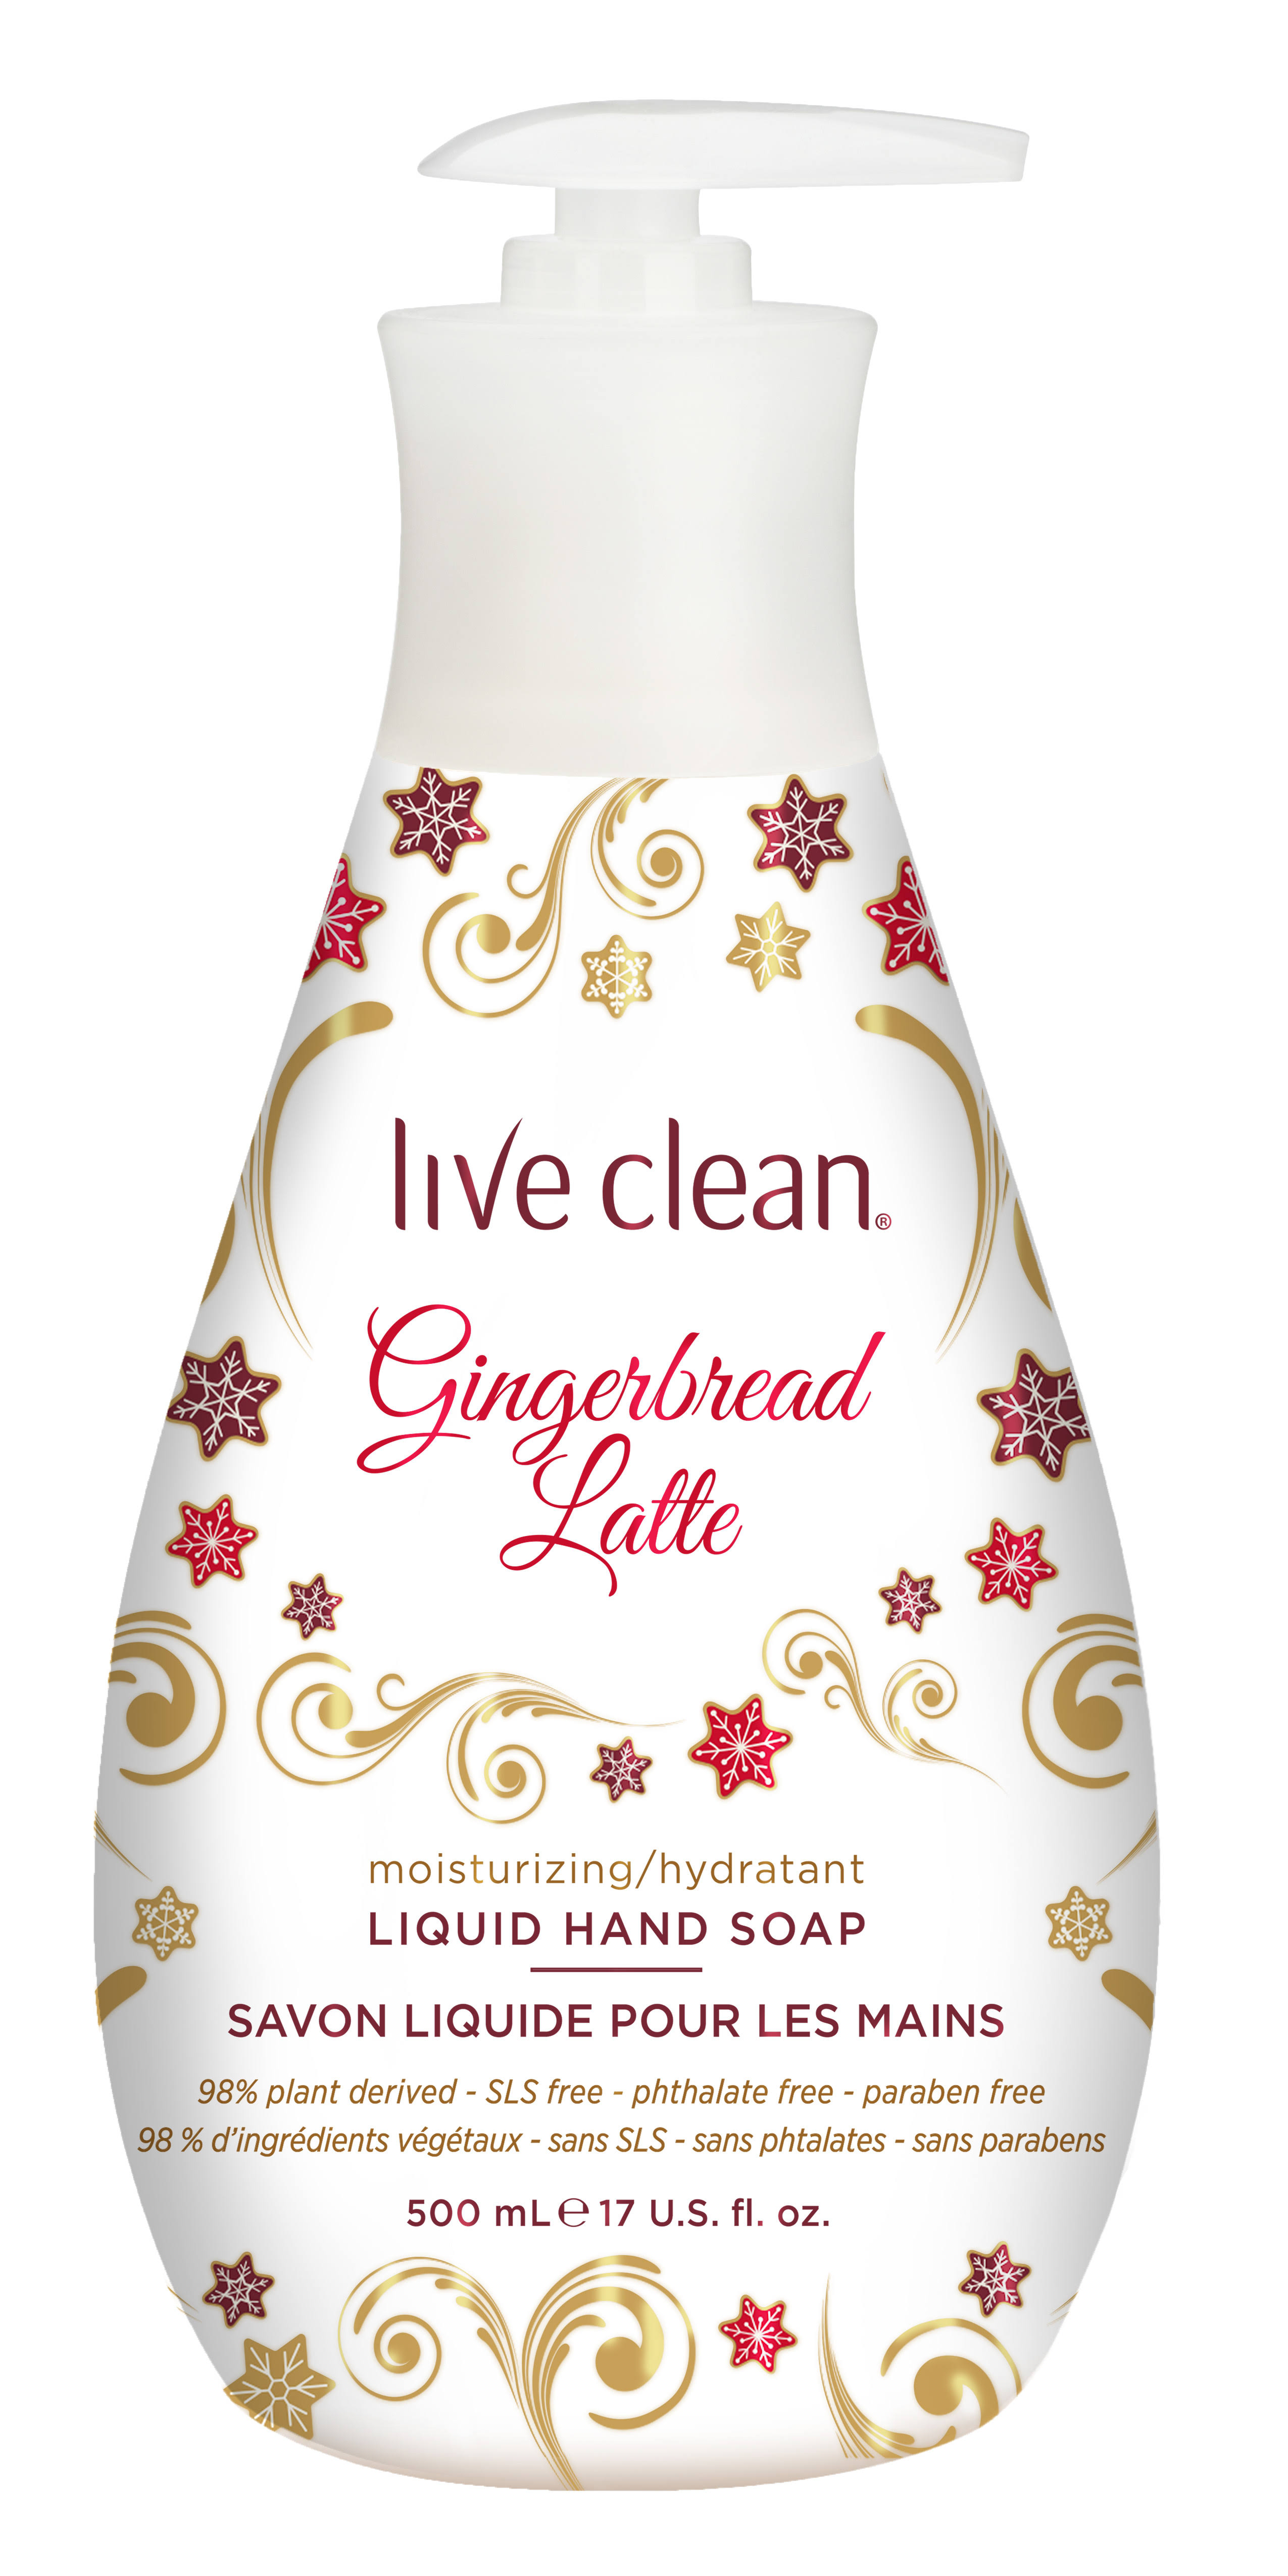 Live Clean Holiday Gingerbread Latte Moisturizing Hand Soap